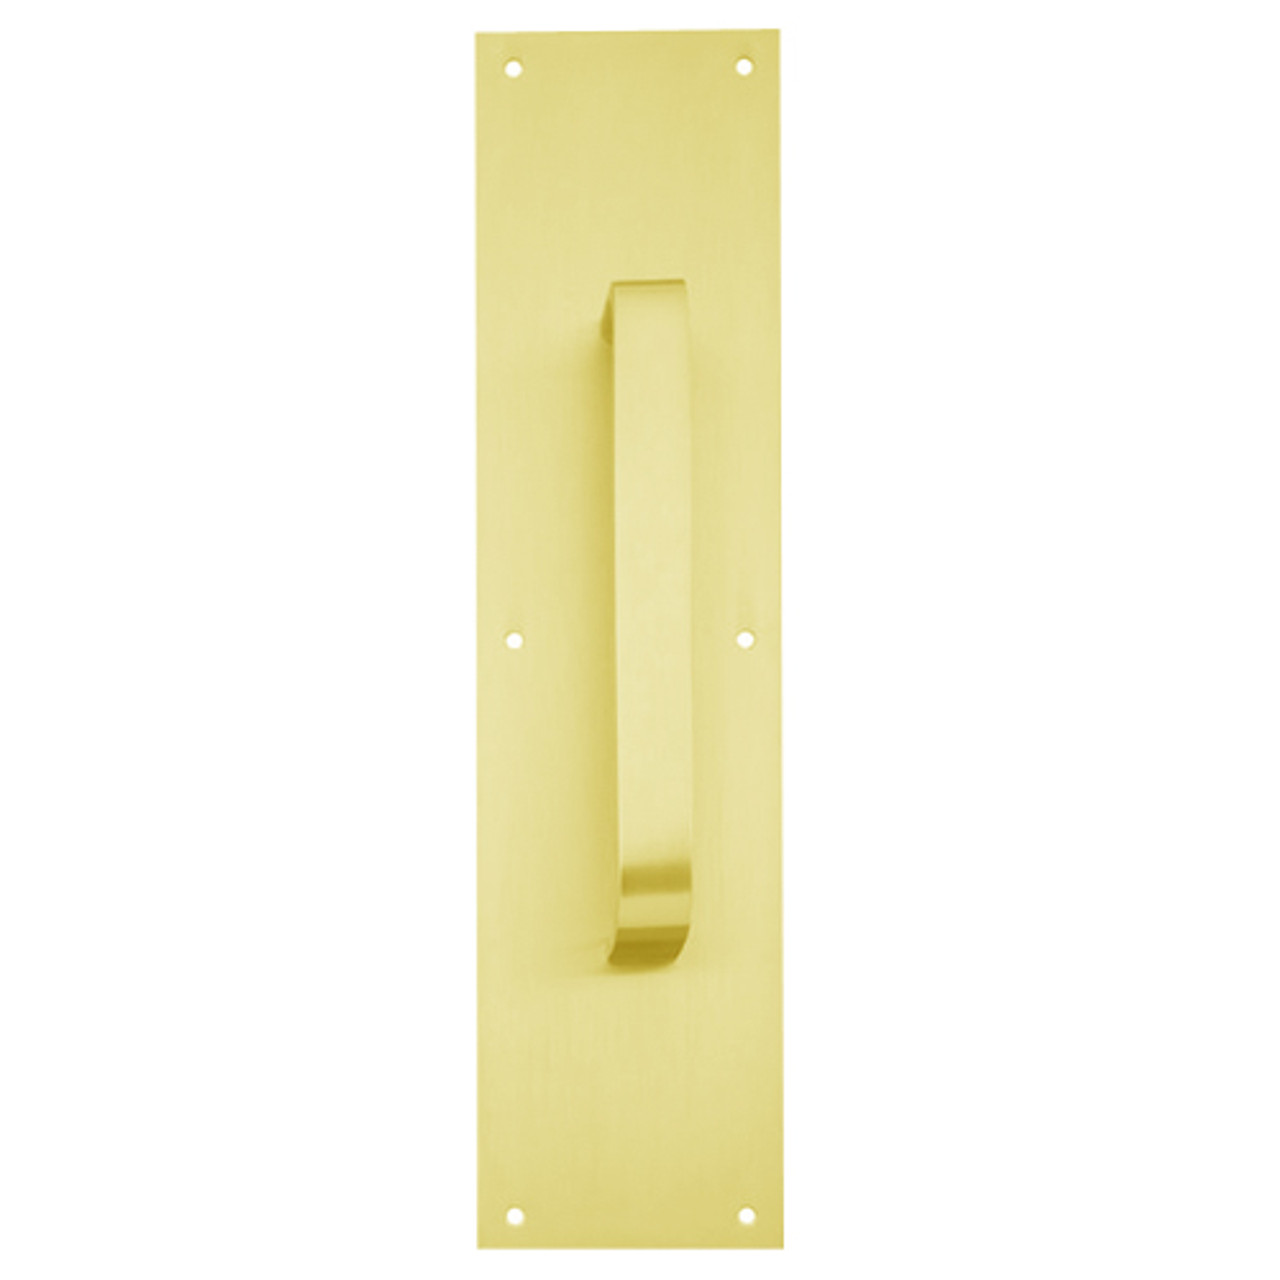 8305-6-US3-4x16 IVES Architectural Door Trim 4x16 Inch Pull Plate in Bright Brass